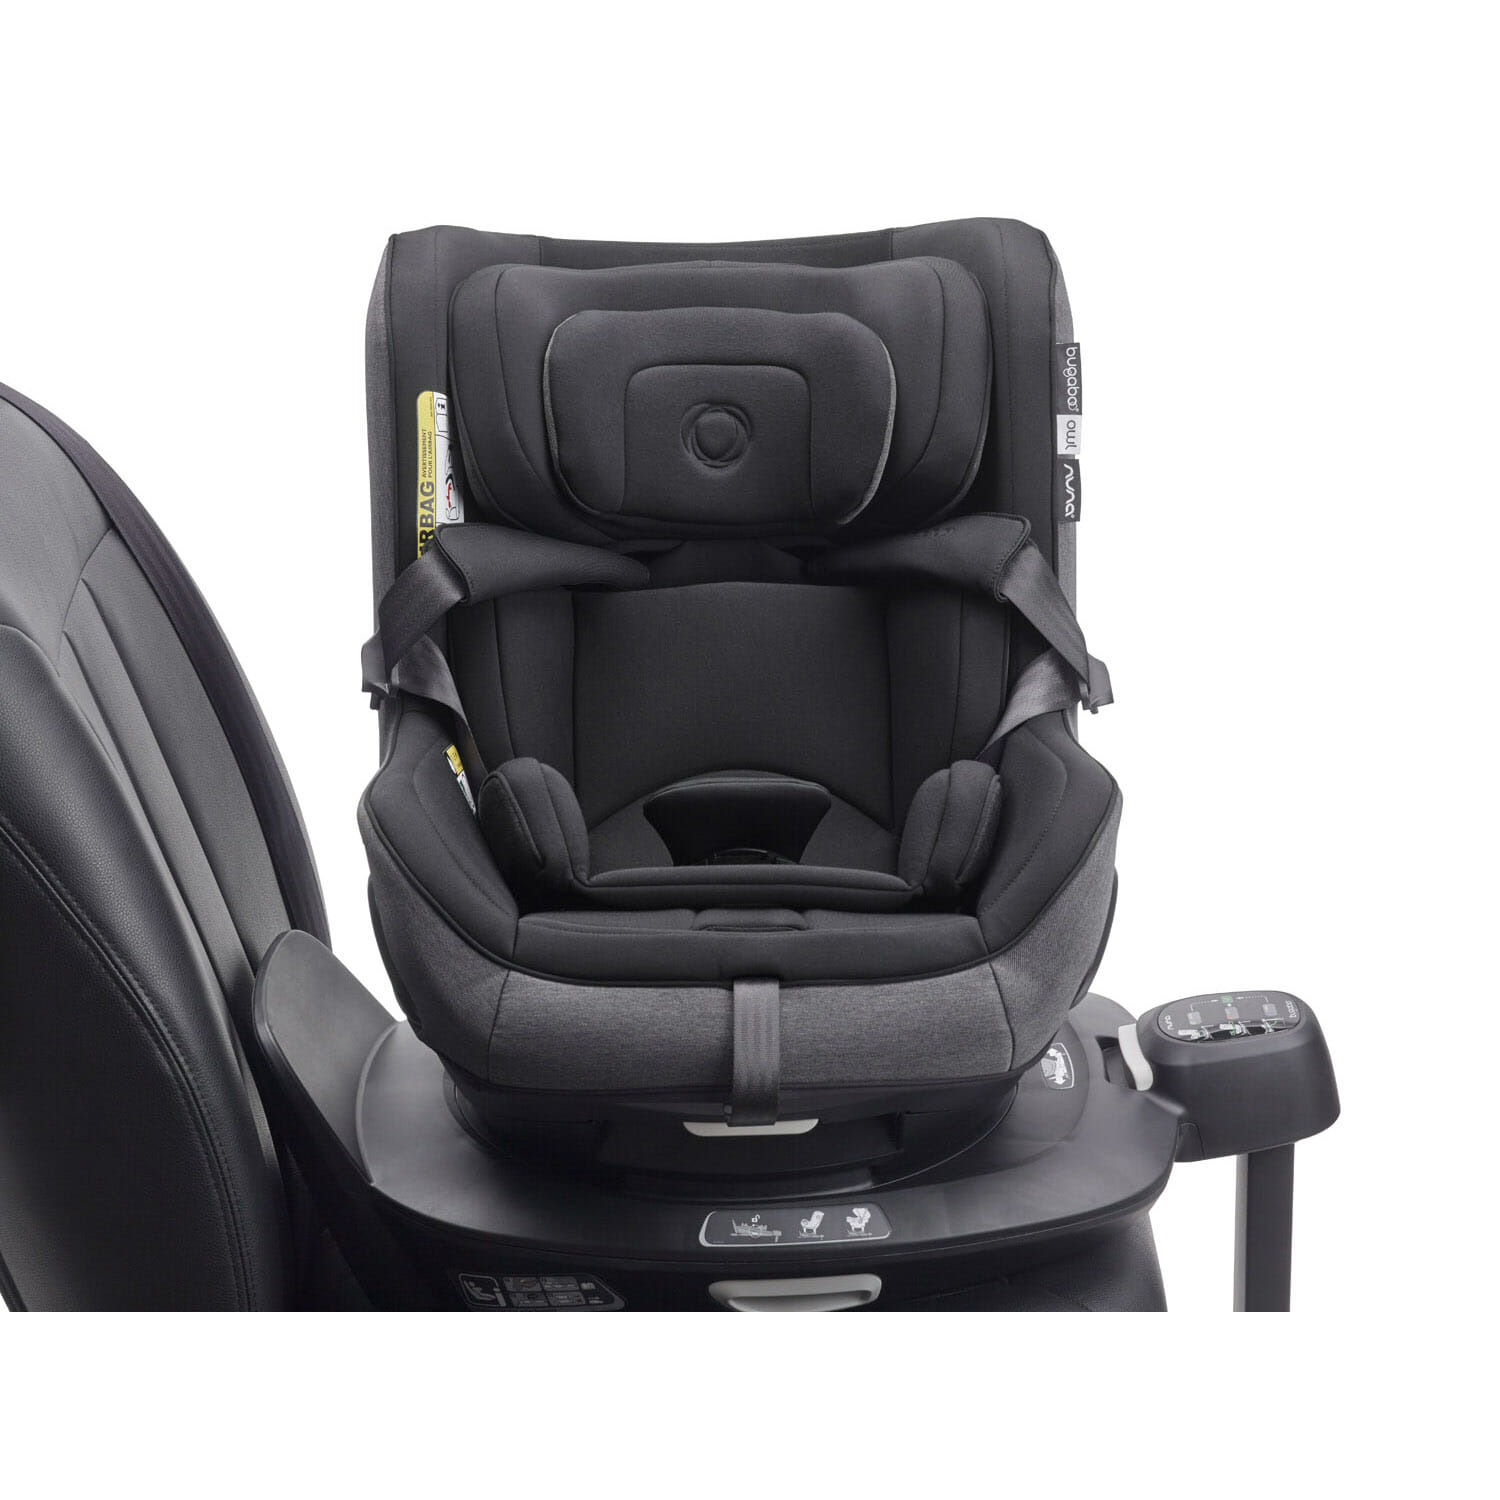 Bugaboo Owl by Nuna Car Seat BLACK - BASE NOT INCLUDED